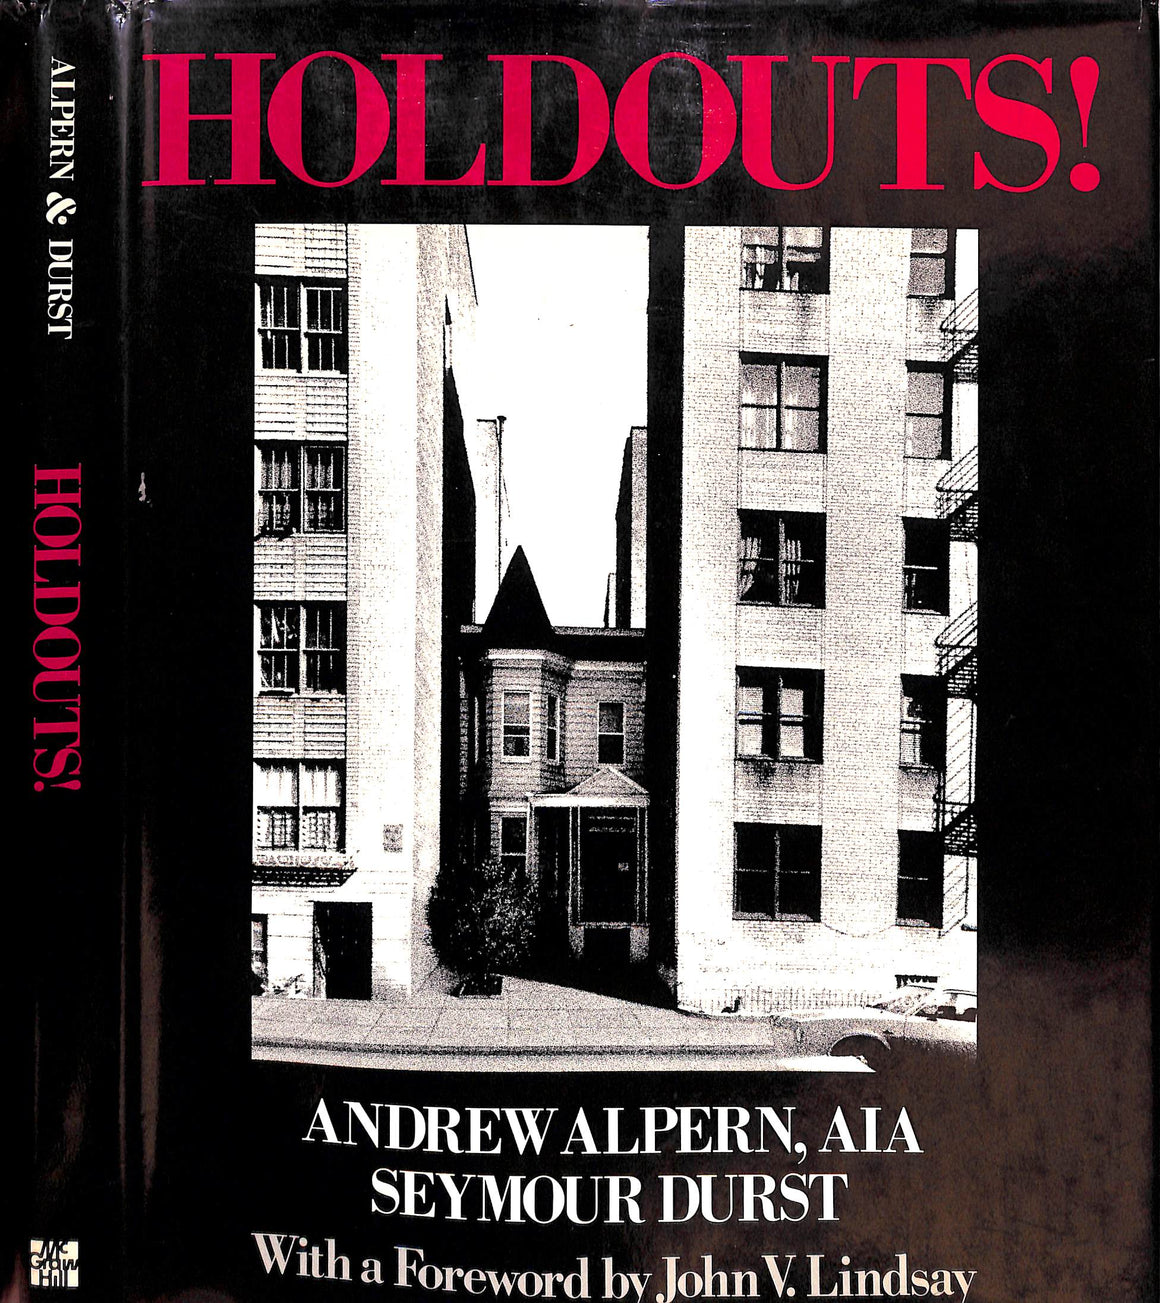 "Holdouts!" 1984 ALPERN, Andrew and DURST, Seymour